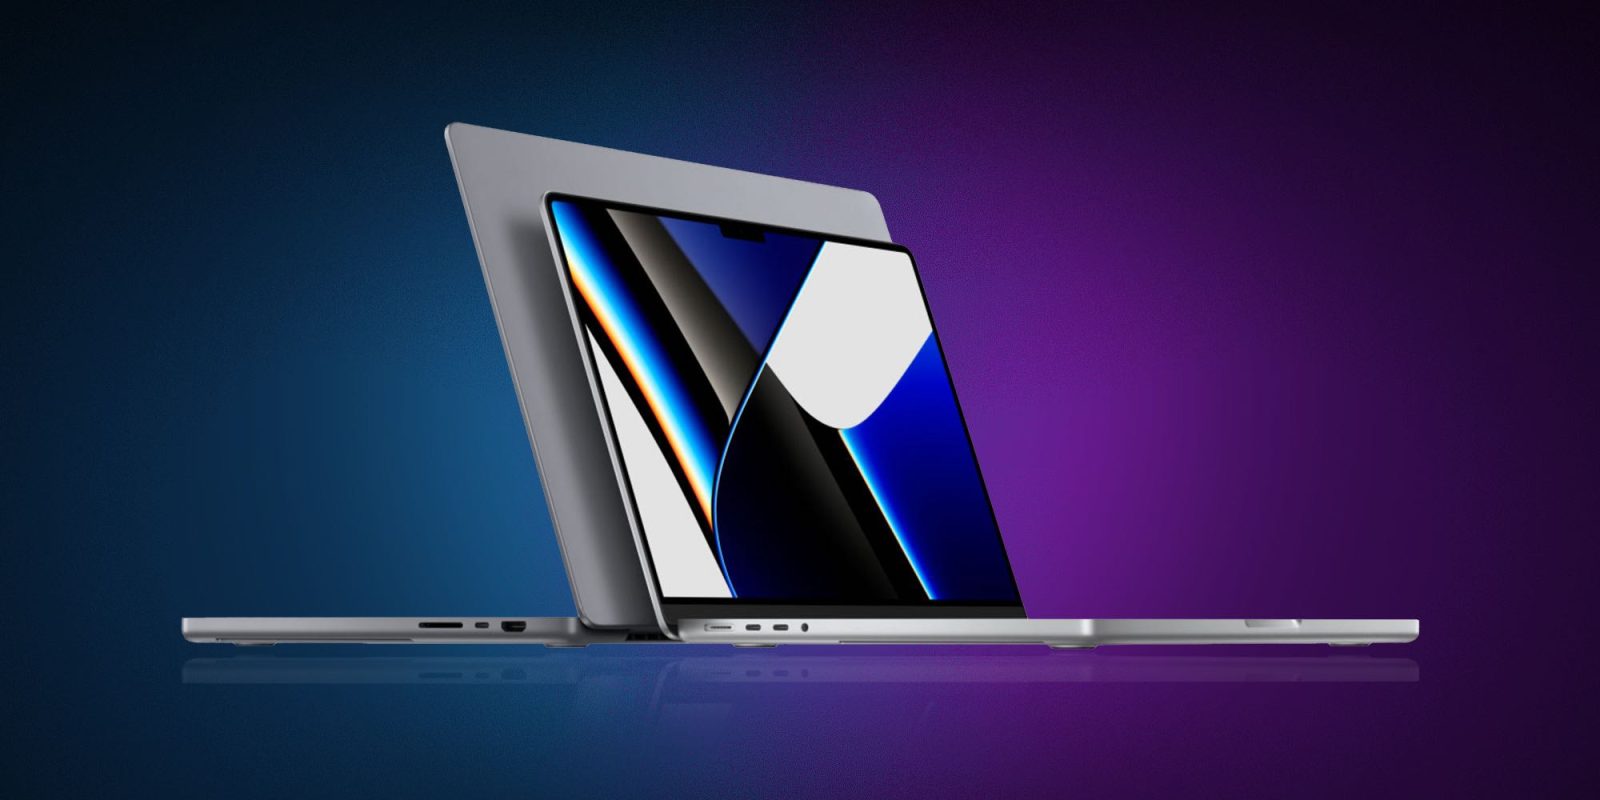 MacBook Pro, Mac Studio, iMac, and more delayed as far back as August